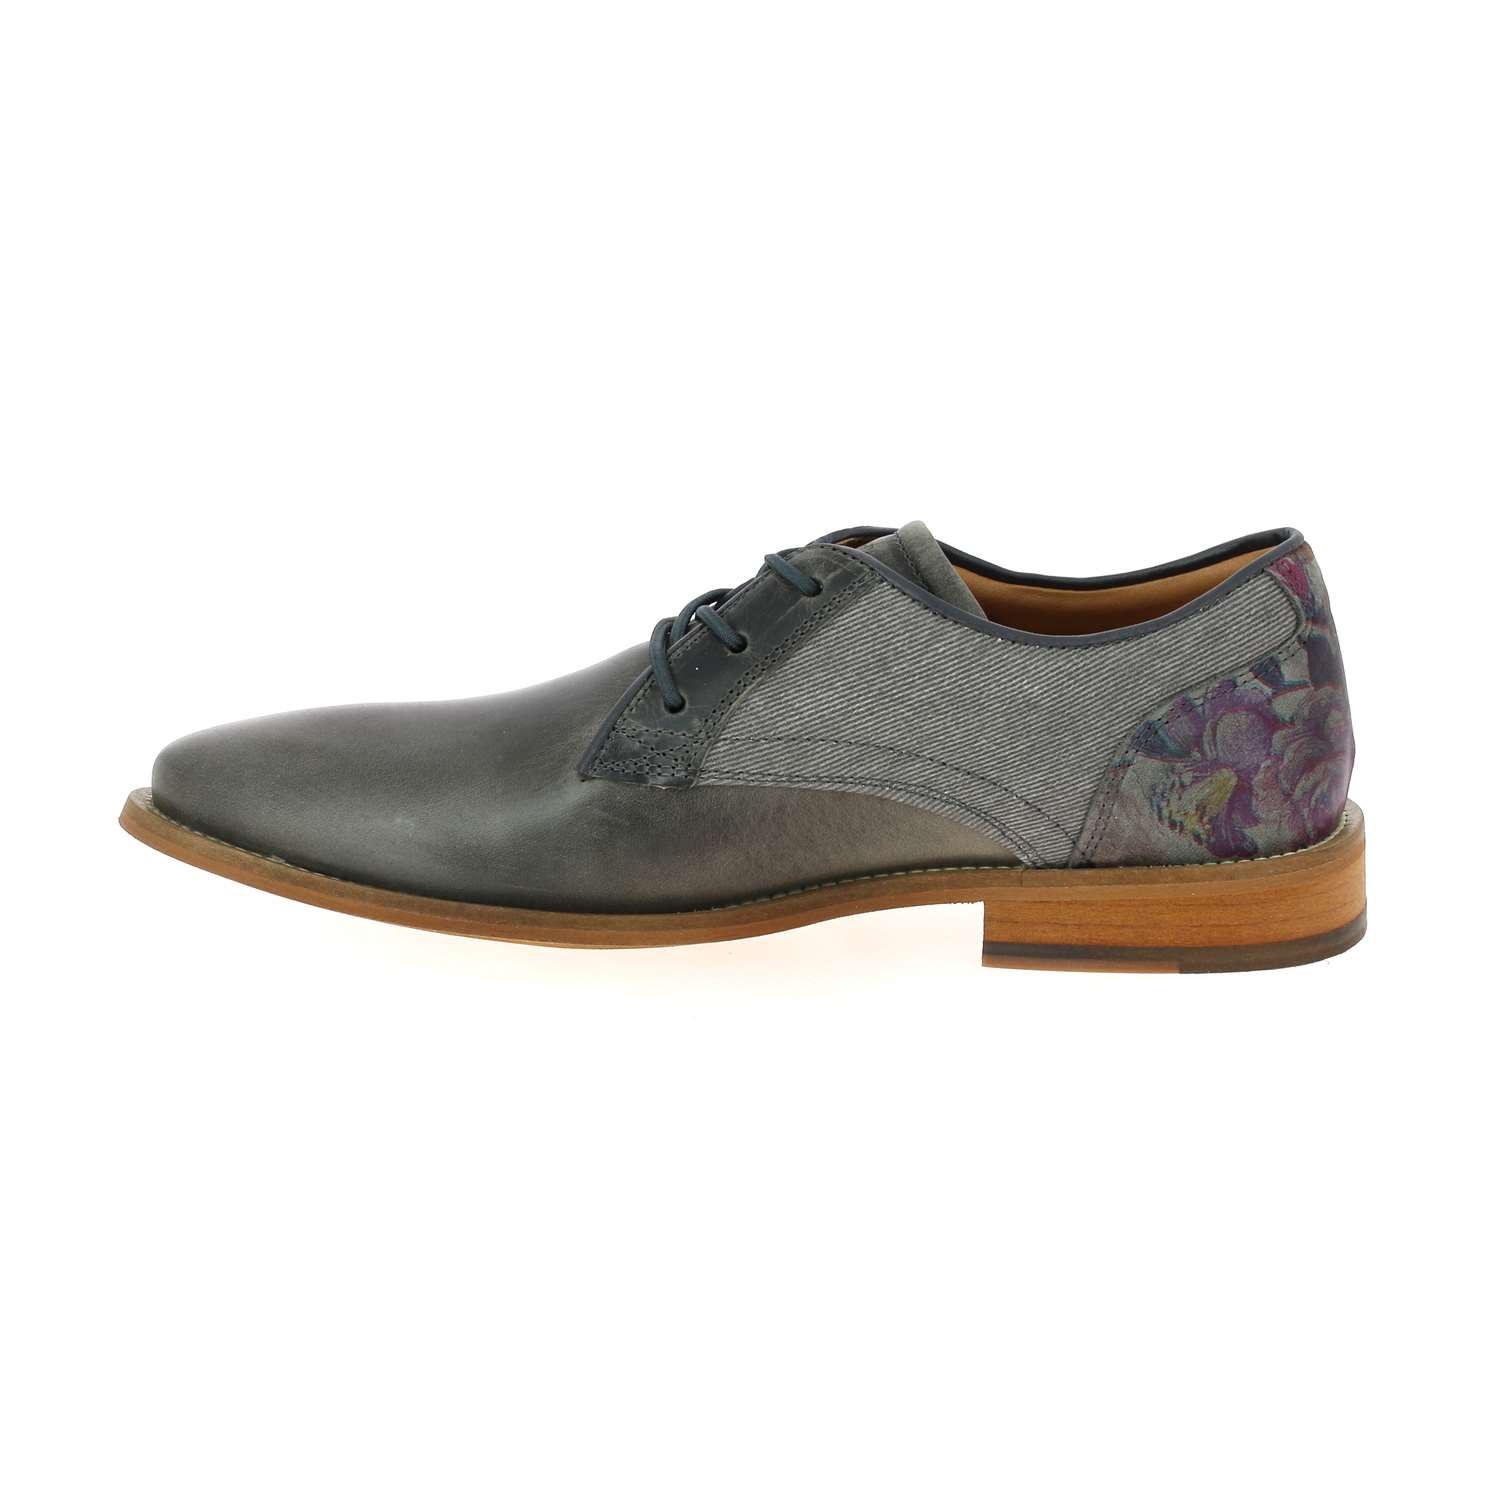 05 - BULLROSE - BULLBOXER - Chaussures à lacets - Cuir / synthétique